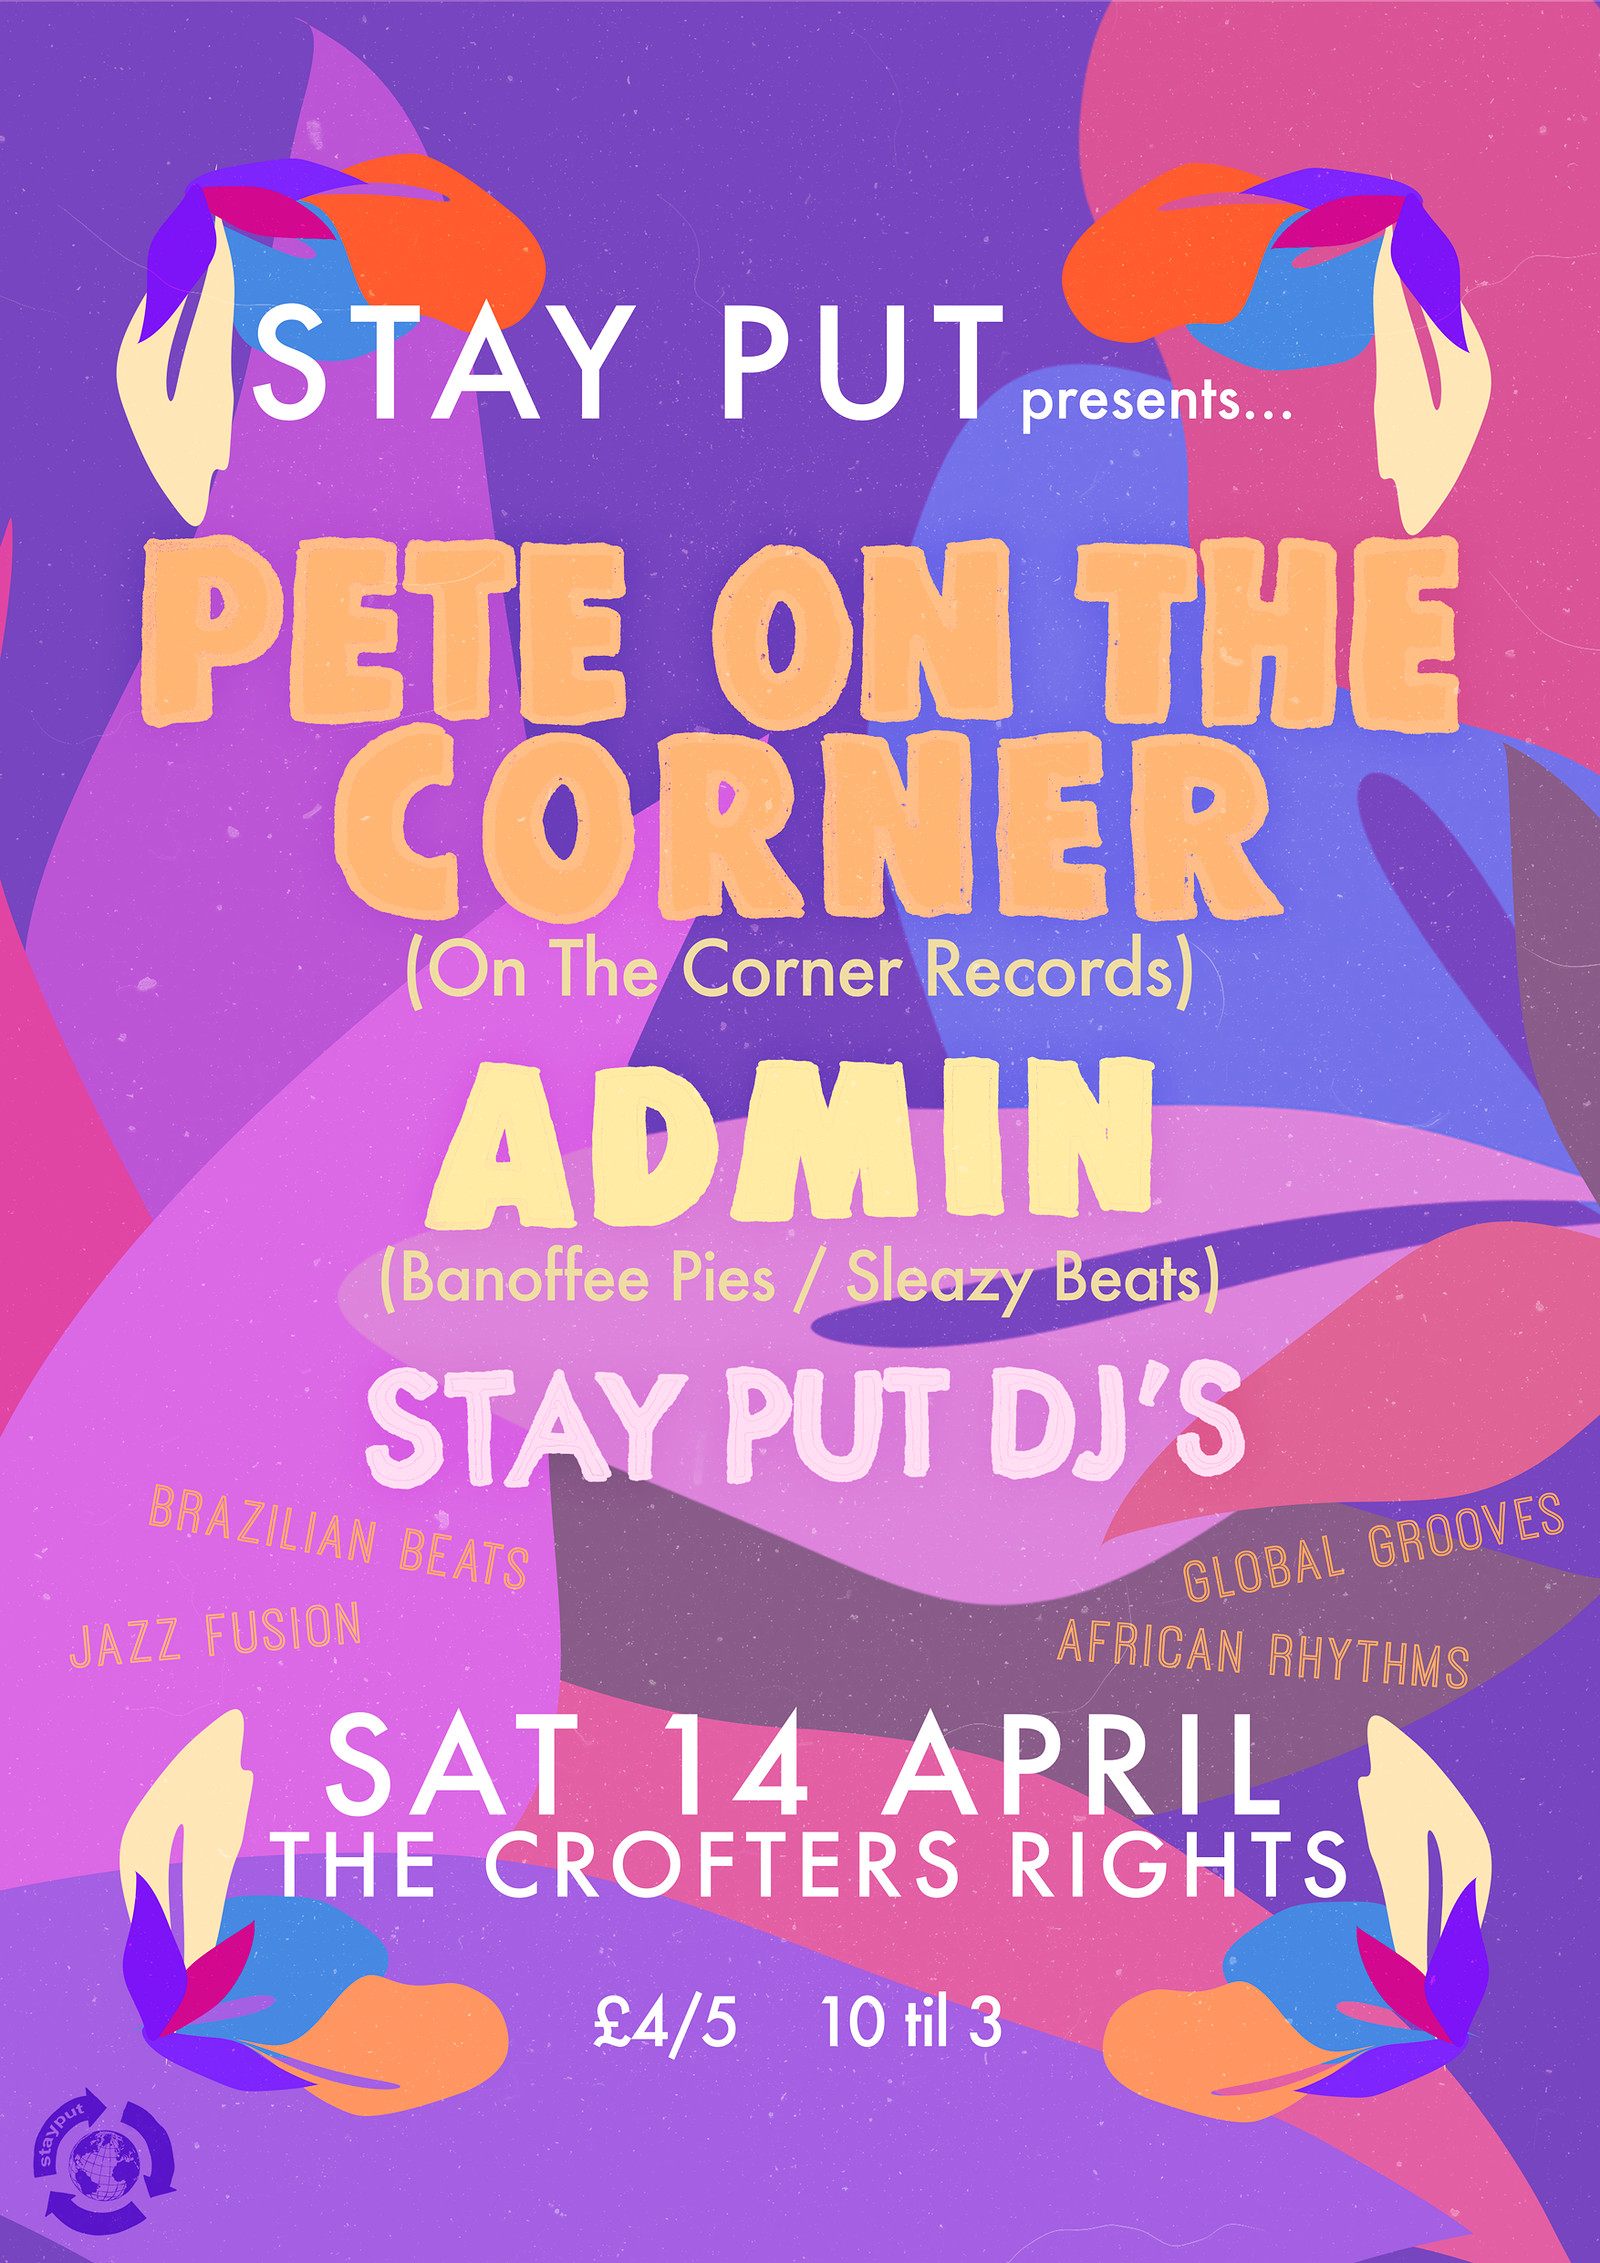 Stay Put launch w/ Pete On The Corner at Crofters Rights